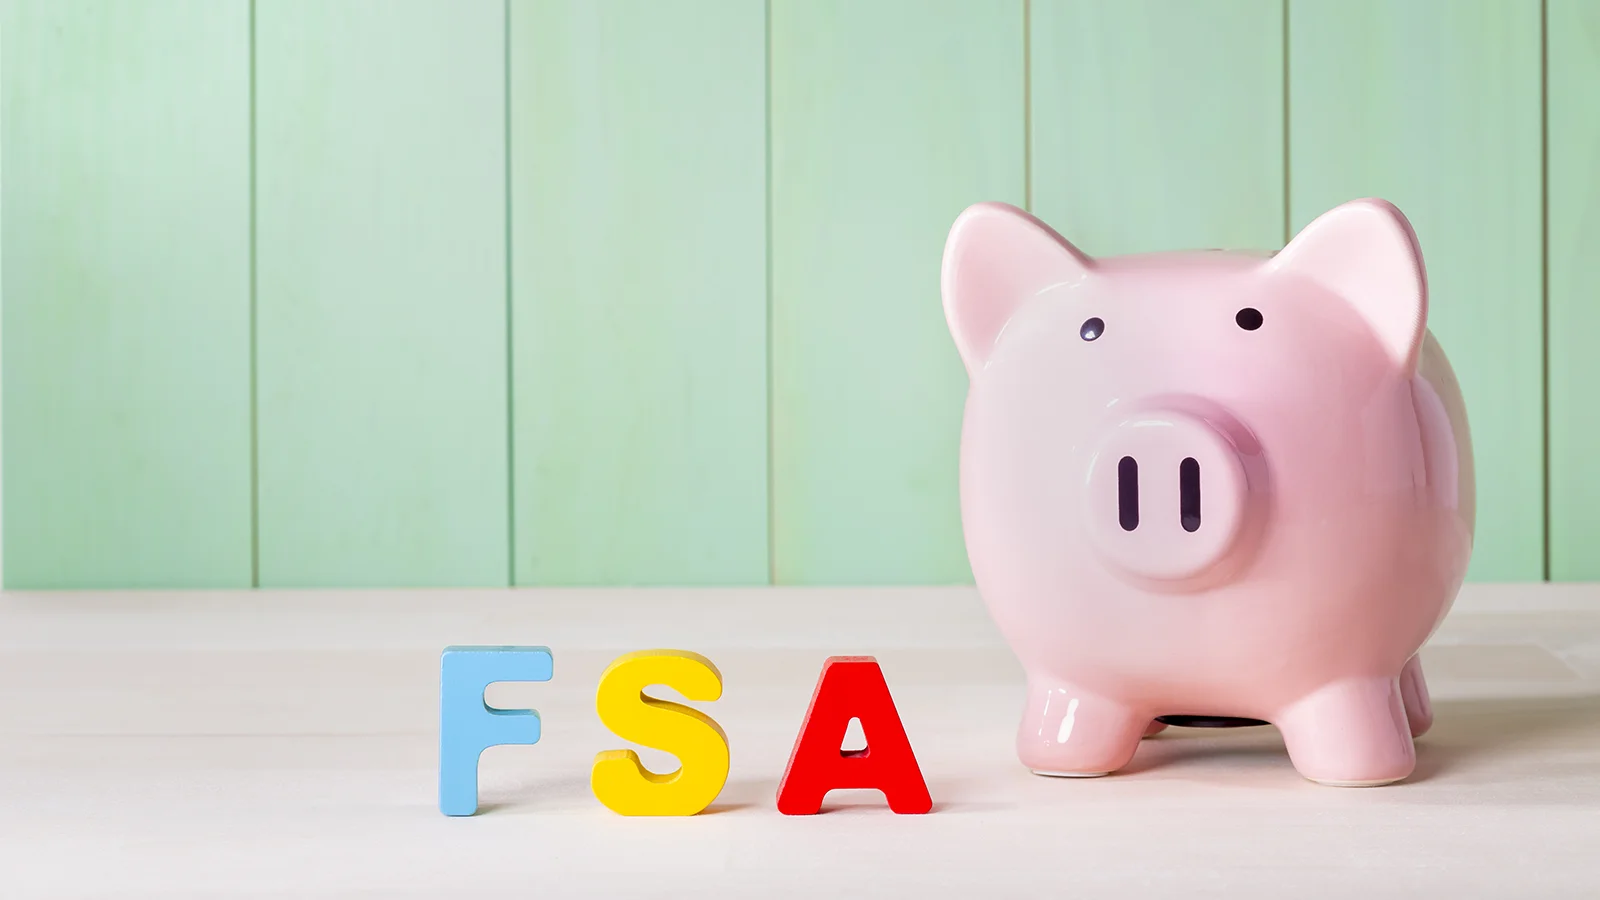 pink piggy bank on table with block letters spelling out "FSA"